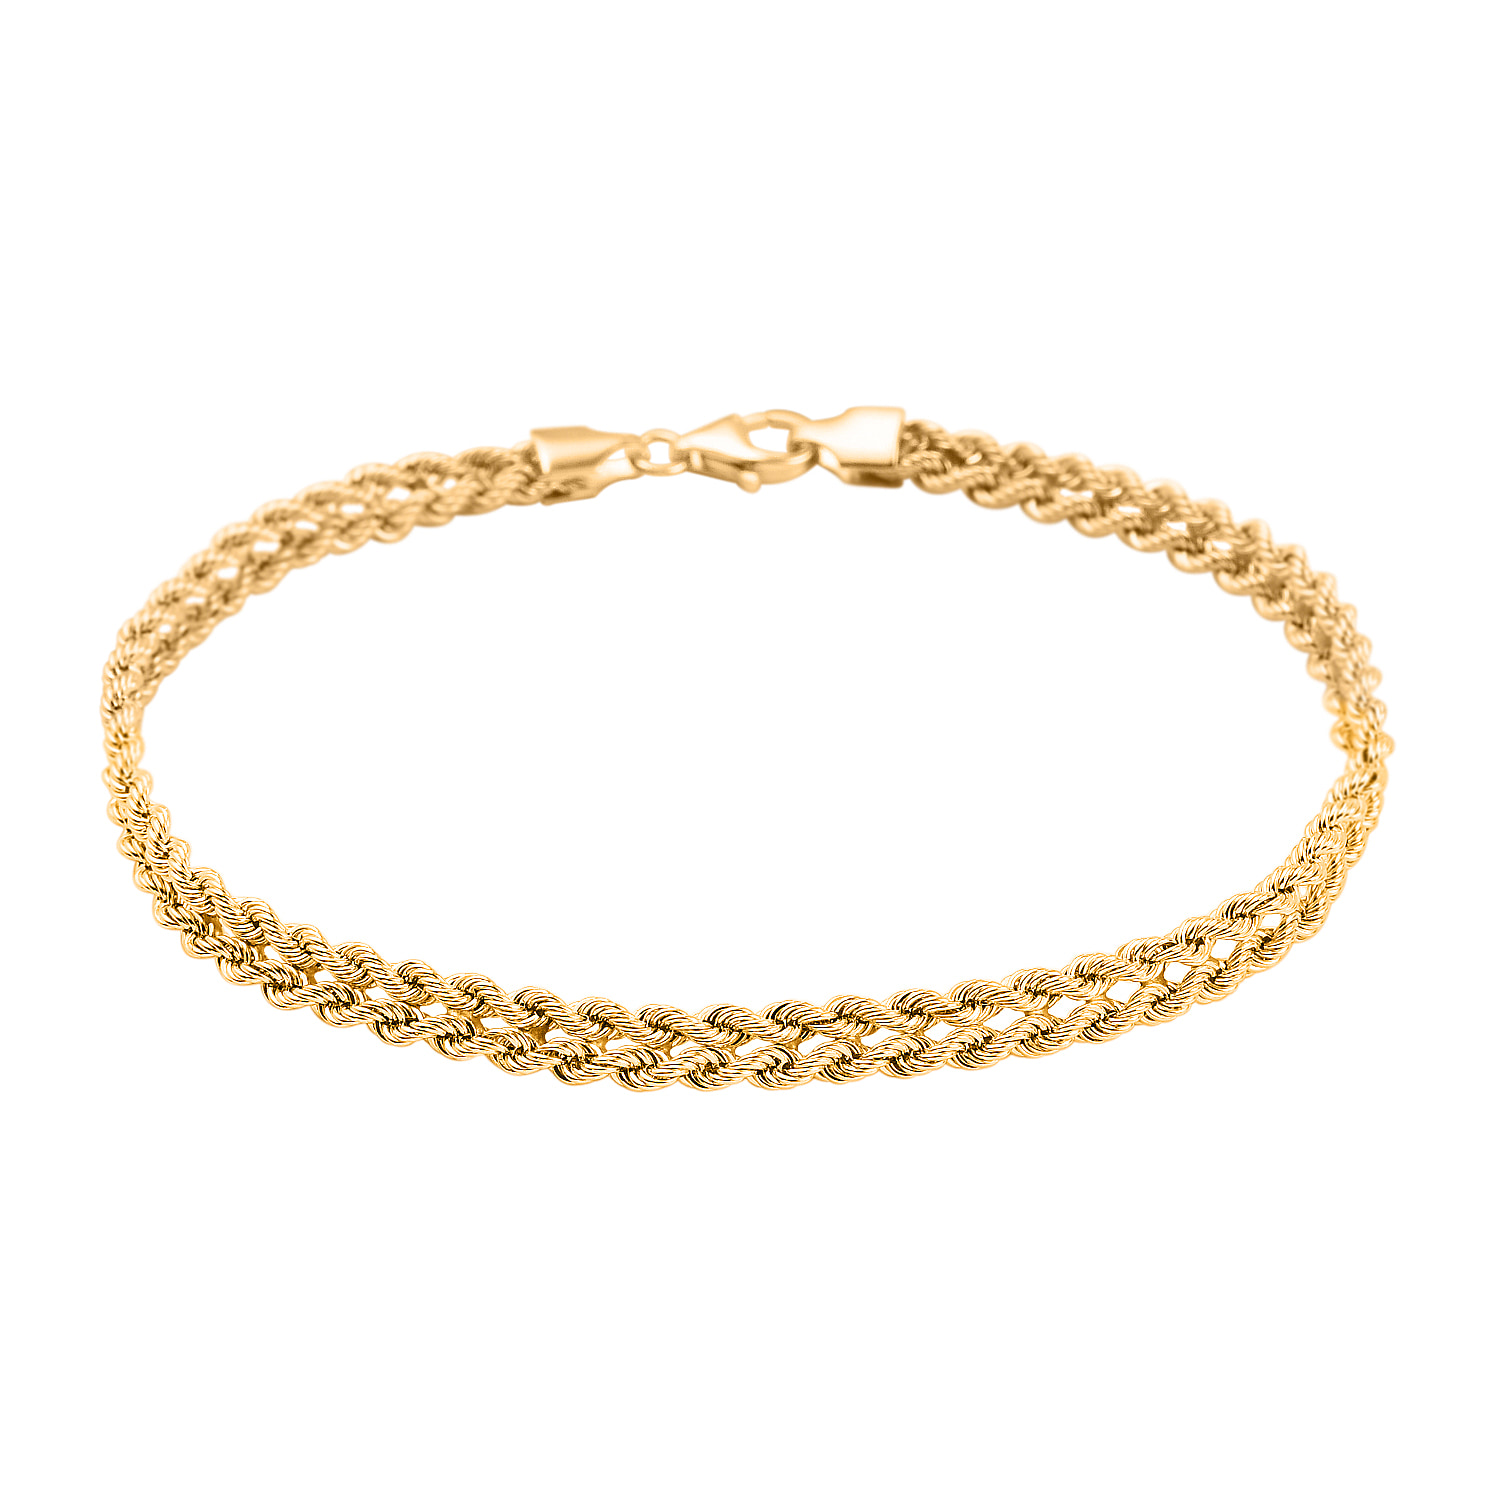 9K Yellow Gold Rope Bracelet Size 7.5 Inch With Lobster Clasp